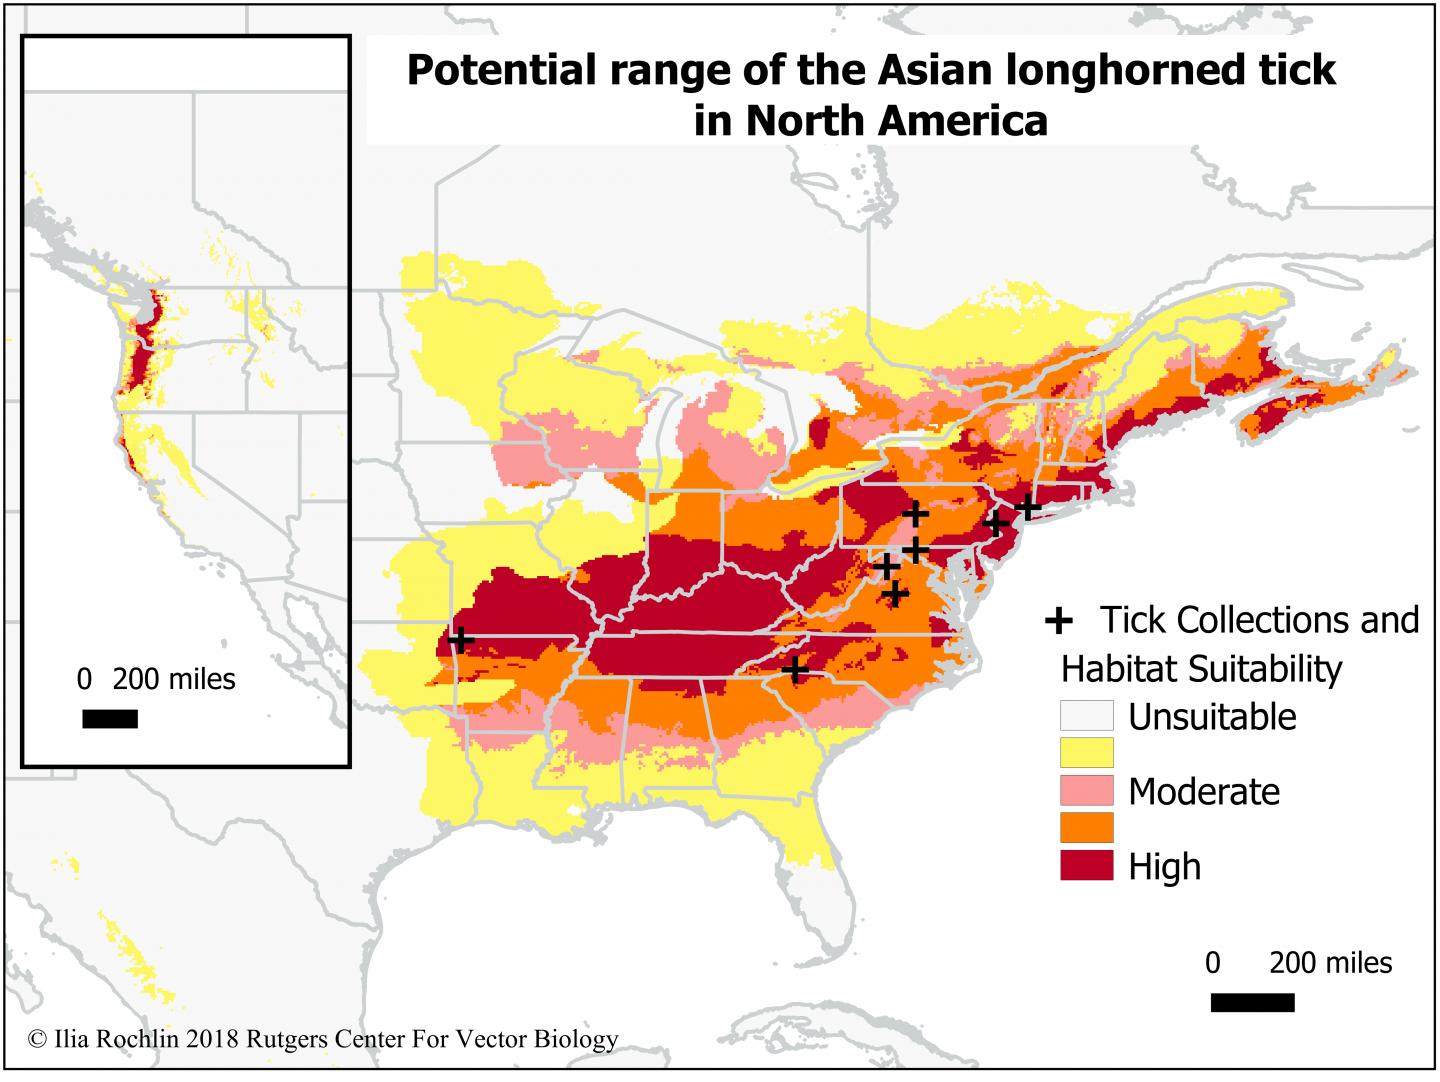 Potential Range of the Asian Longhorned Tick in North America